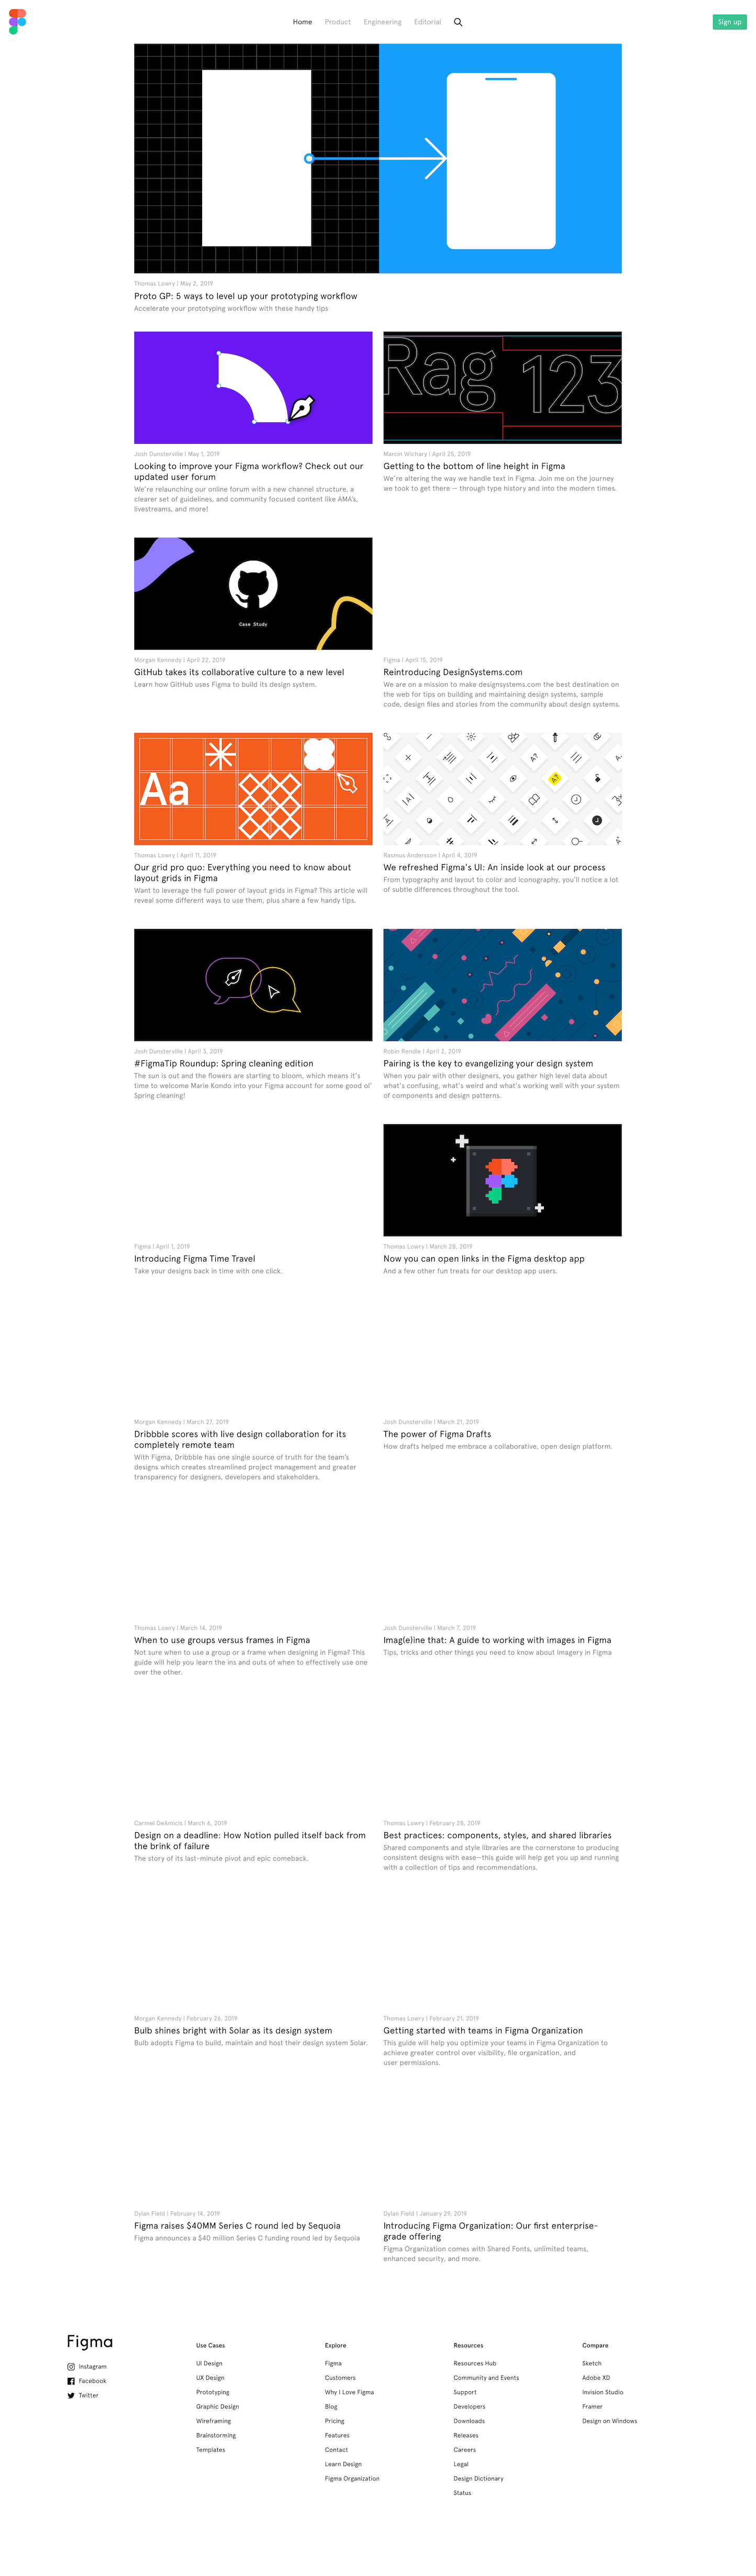 Screenshot of the Blog - Main page from the Figma website.